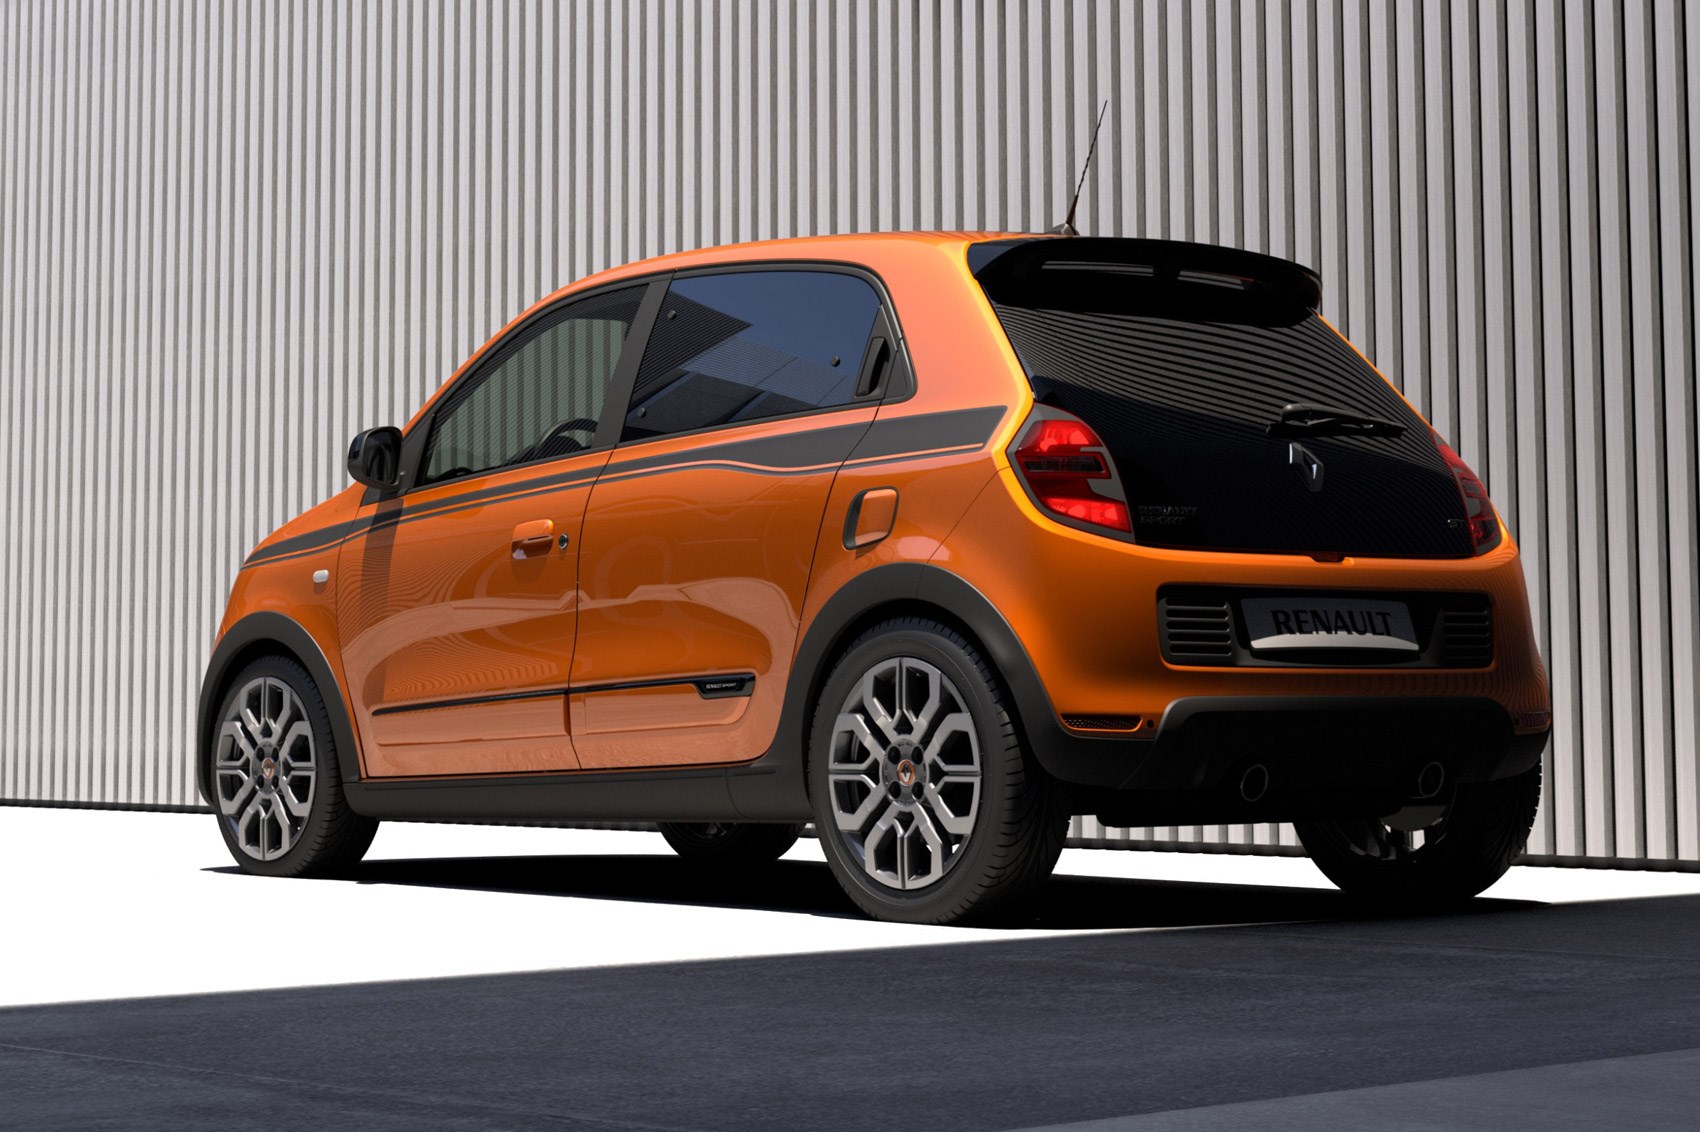 That's more like it: new Renault Twingo GT revealed